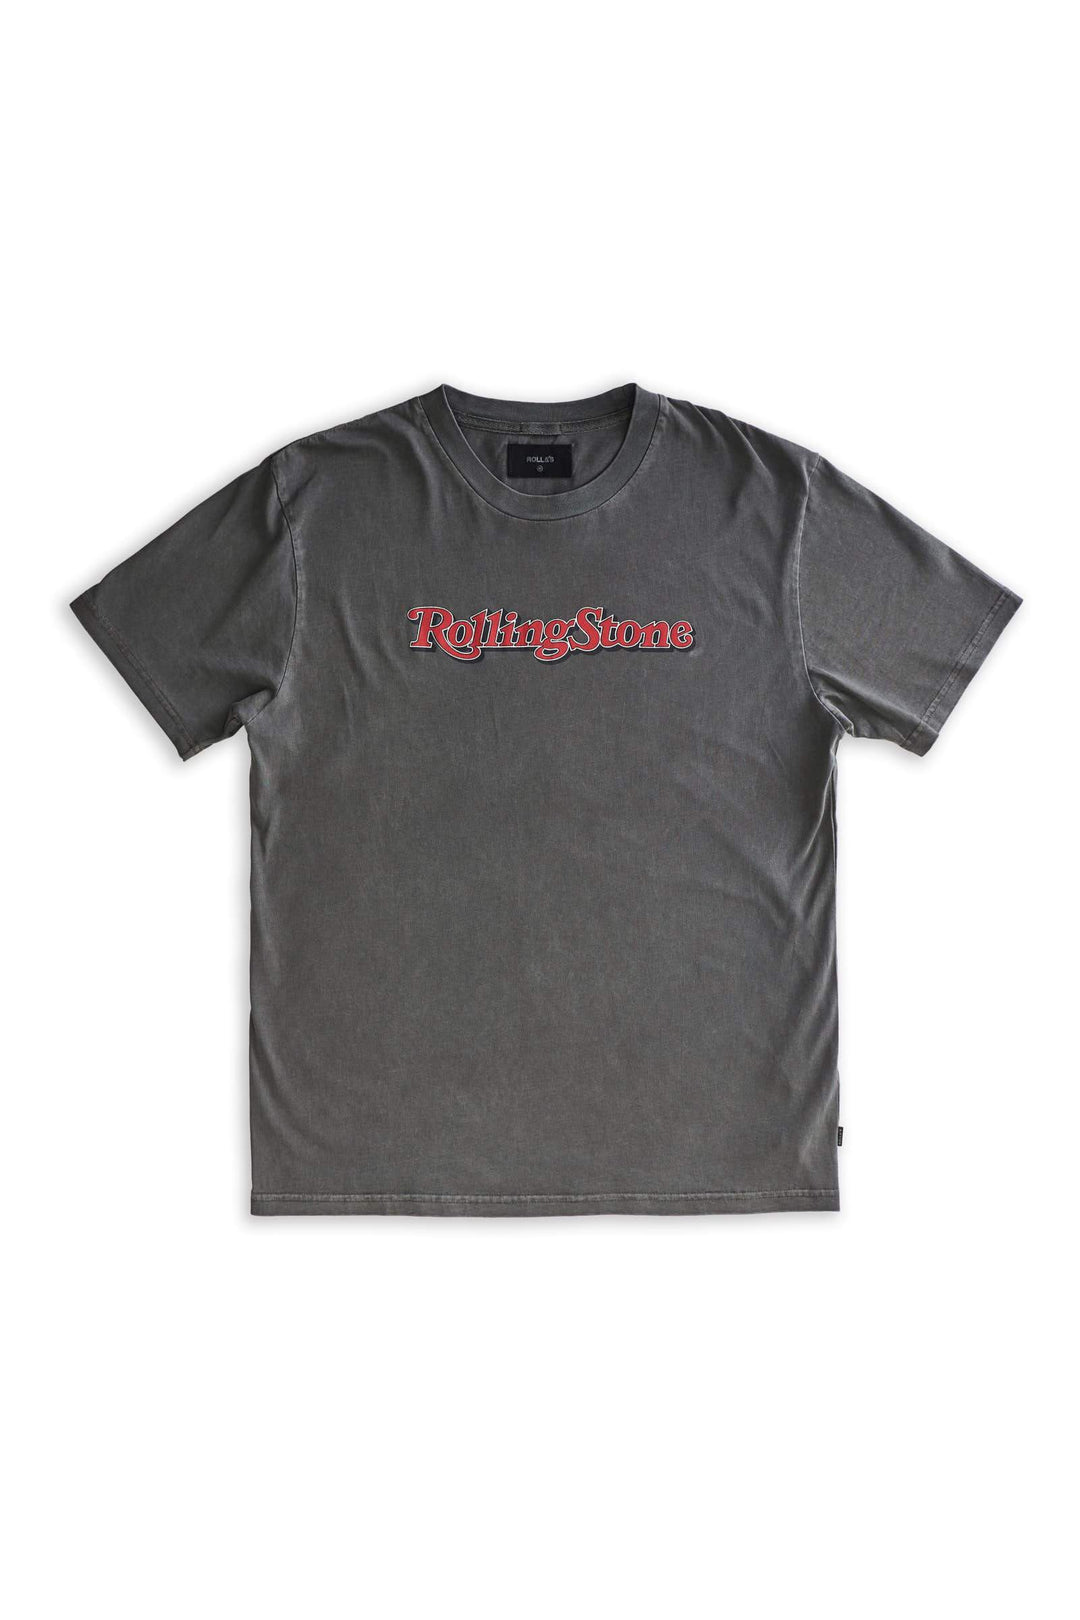 Rolling Stone 1981 Tee- Washed Black